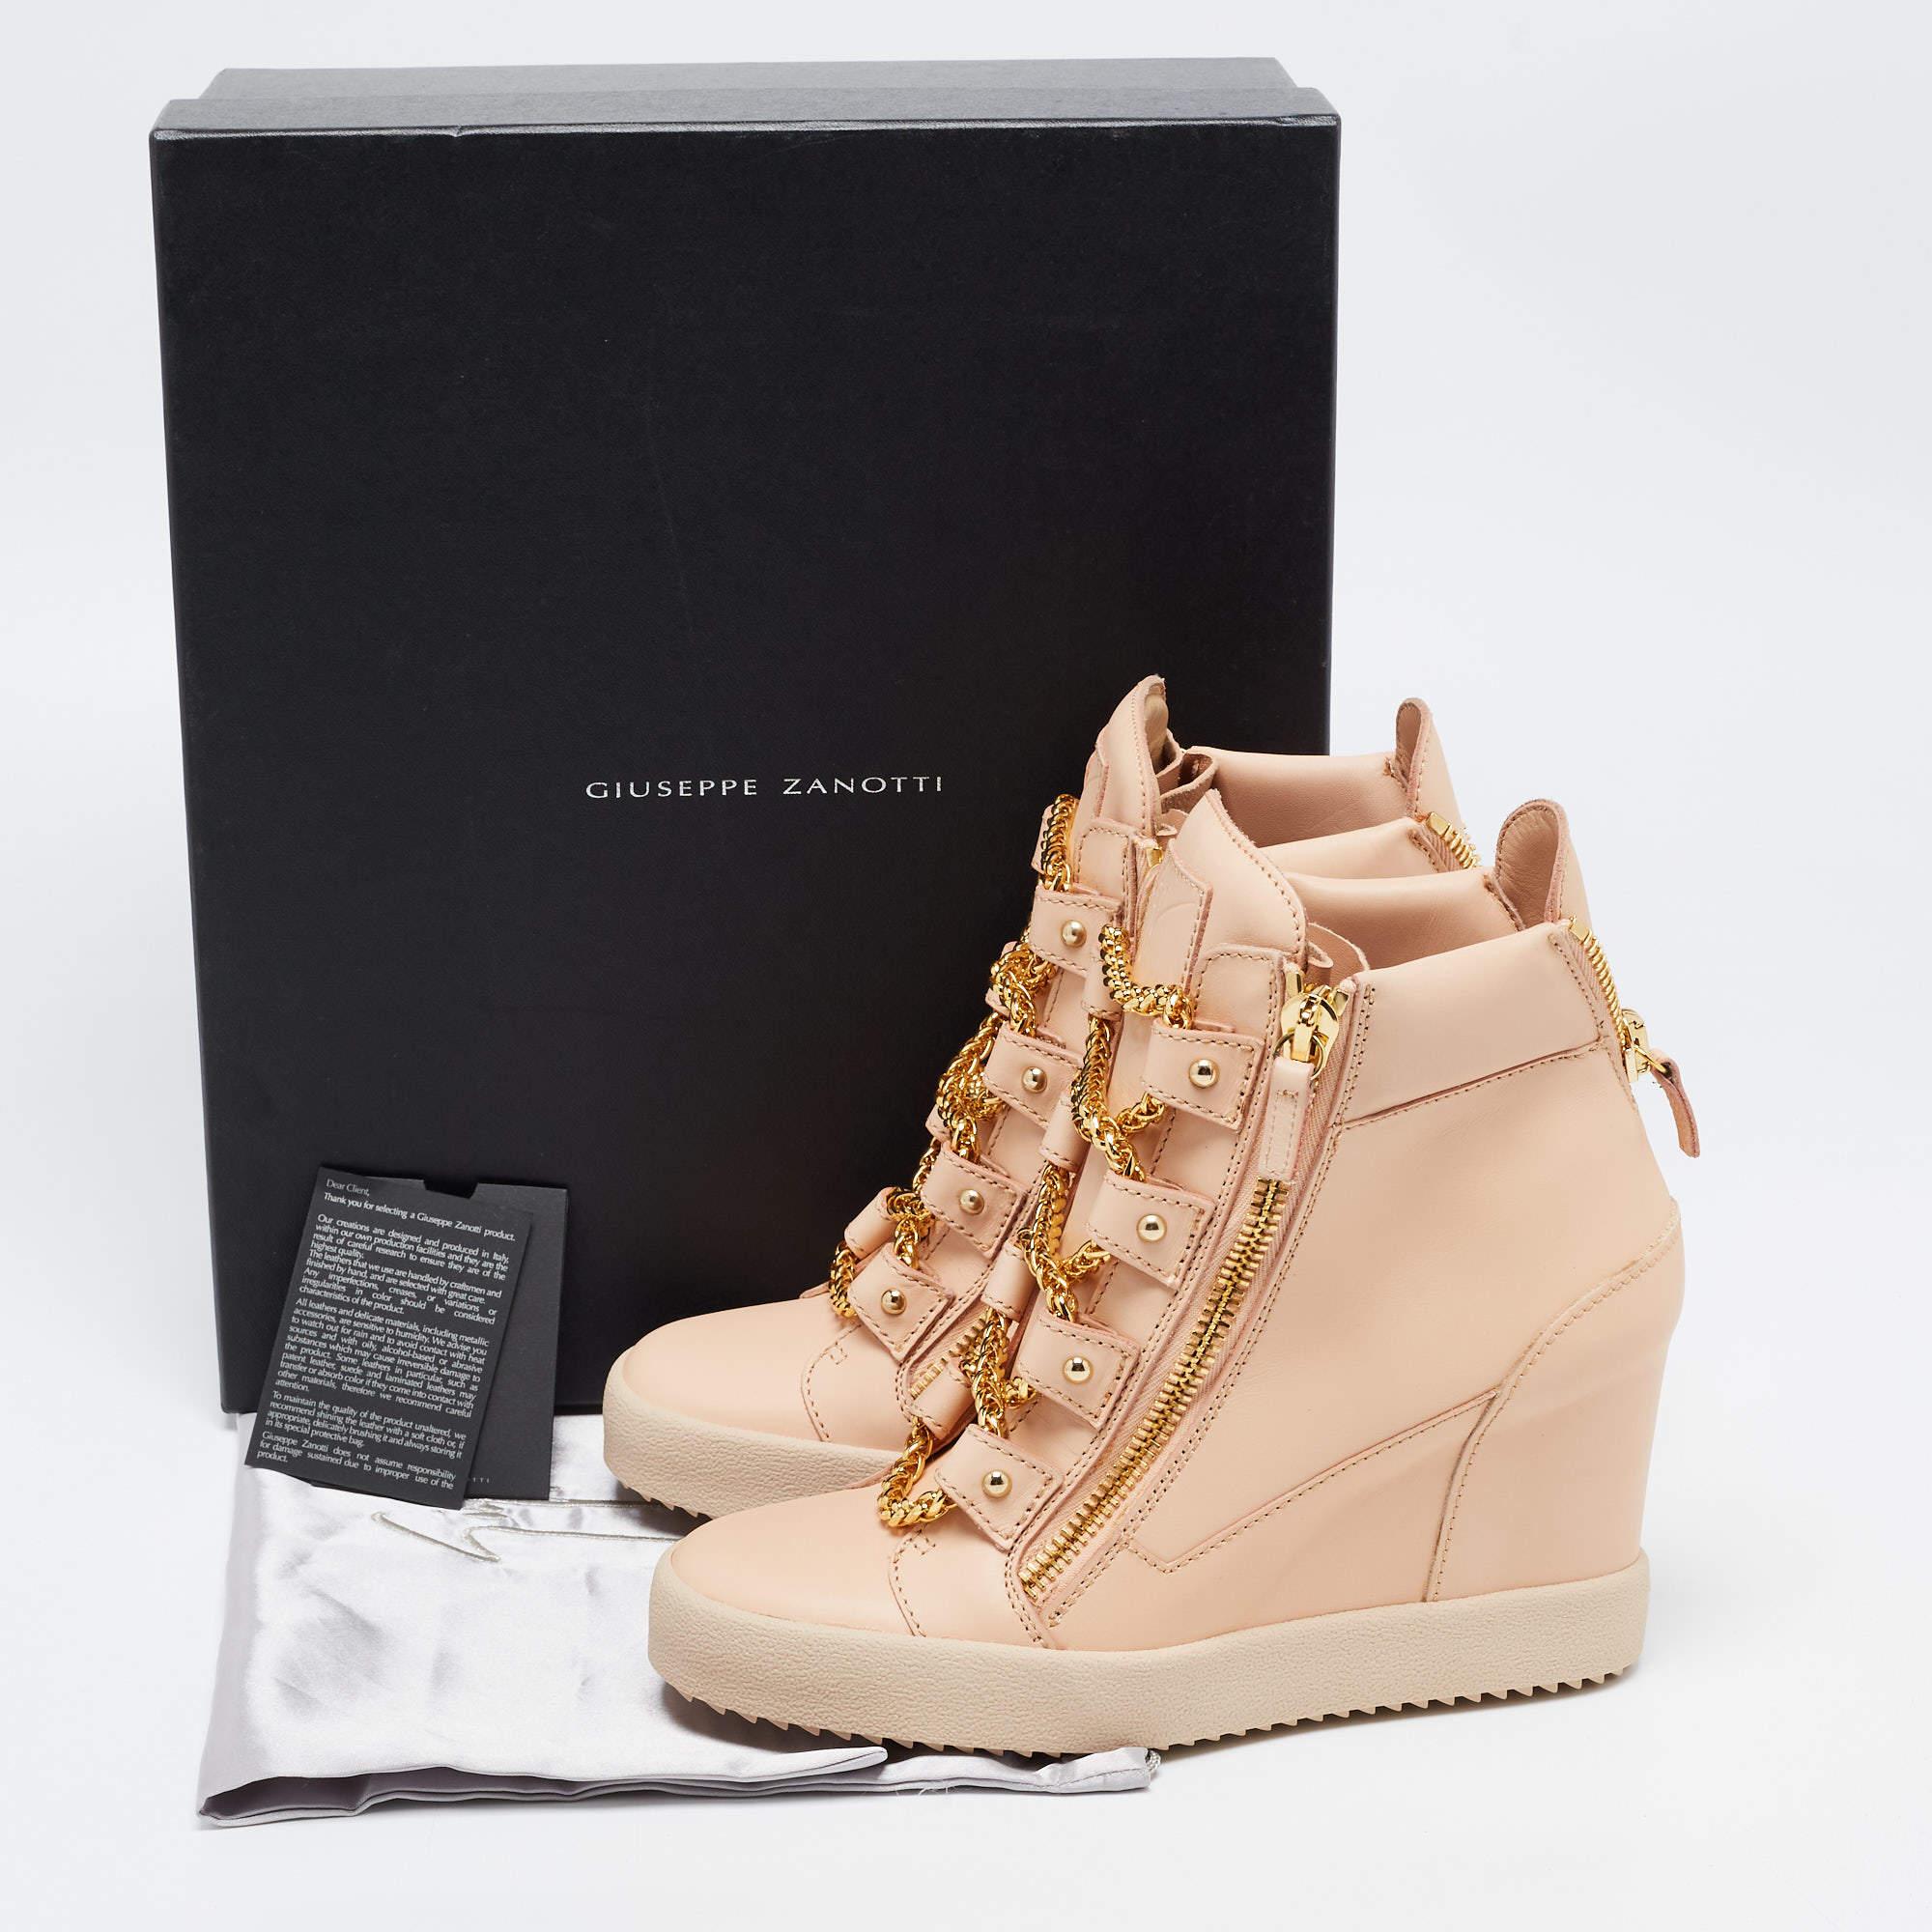 Giuseppe Zanotti Beige Leather Chain Detail High Top Wedge Sneakers Size 41 3